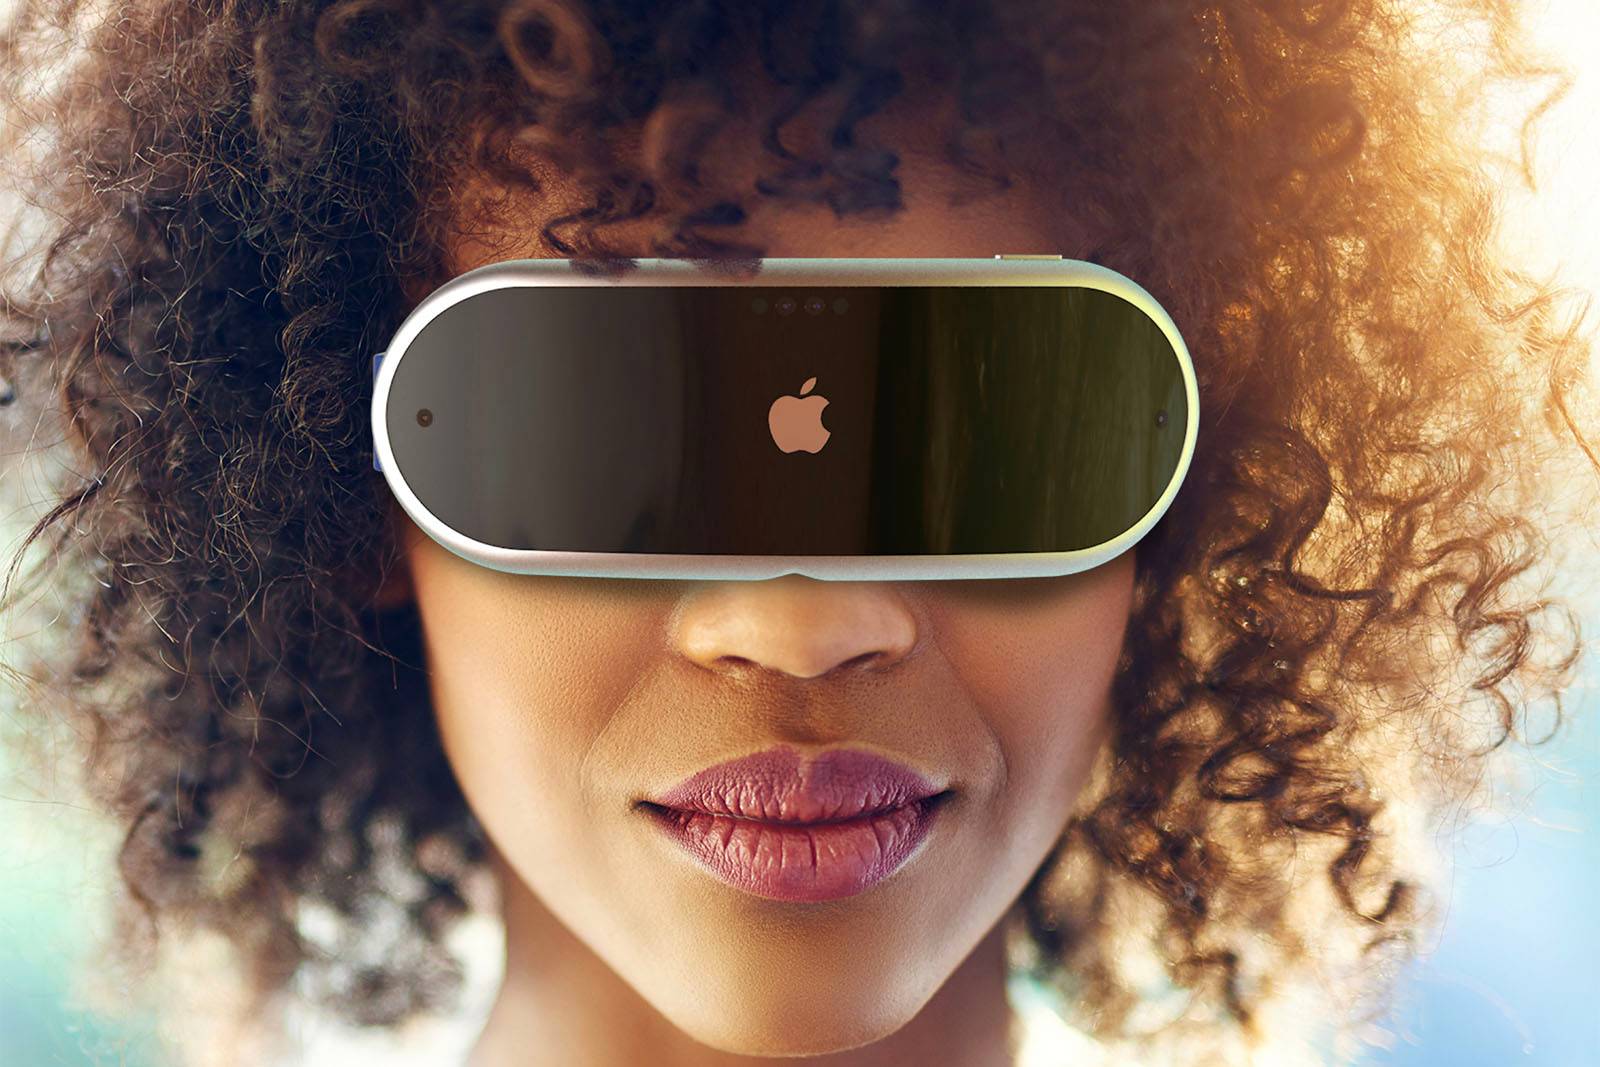 Apple's AR/VR headset patent hints at Continuity and Handoff integration